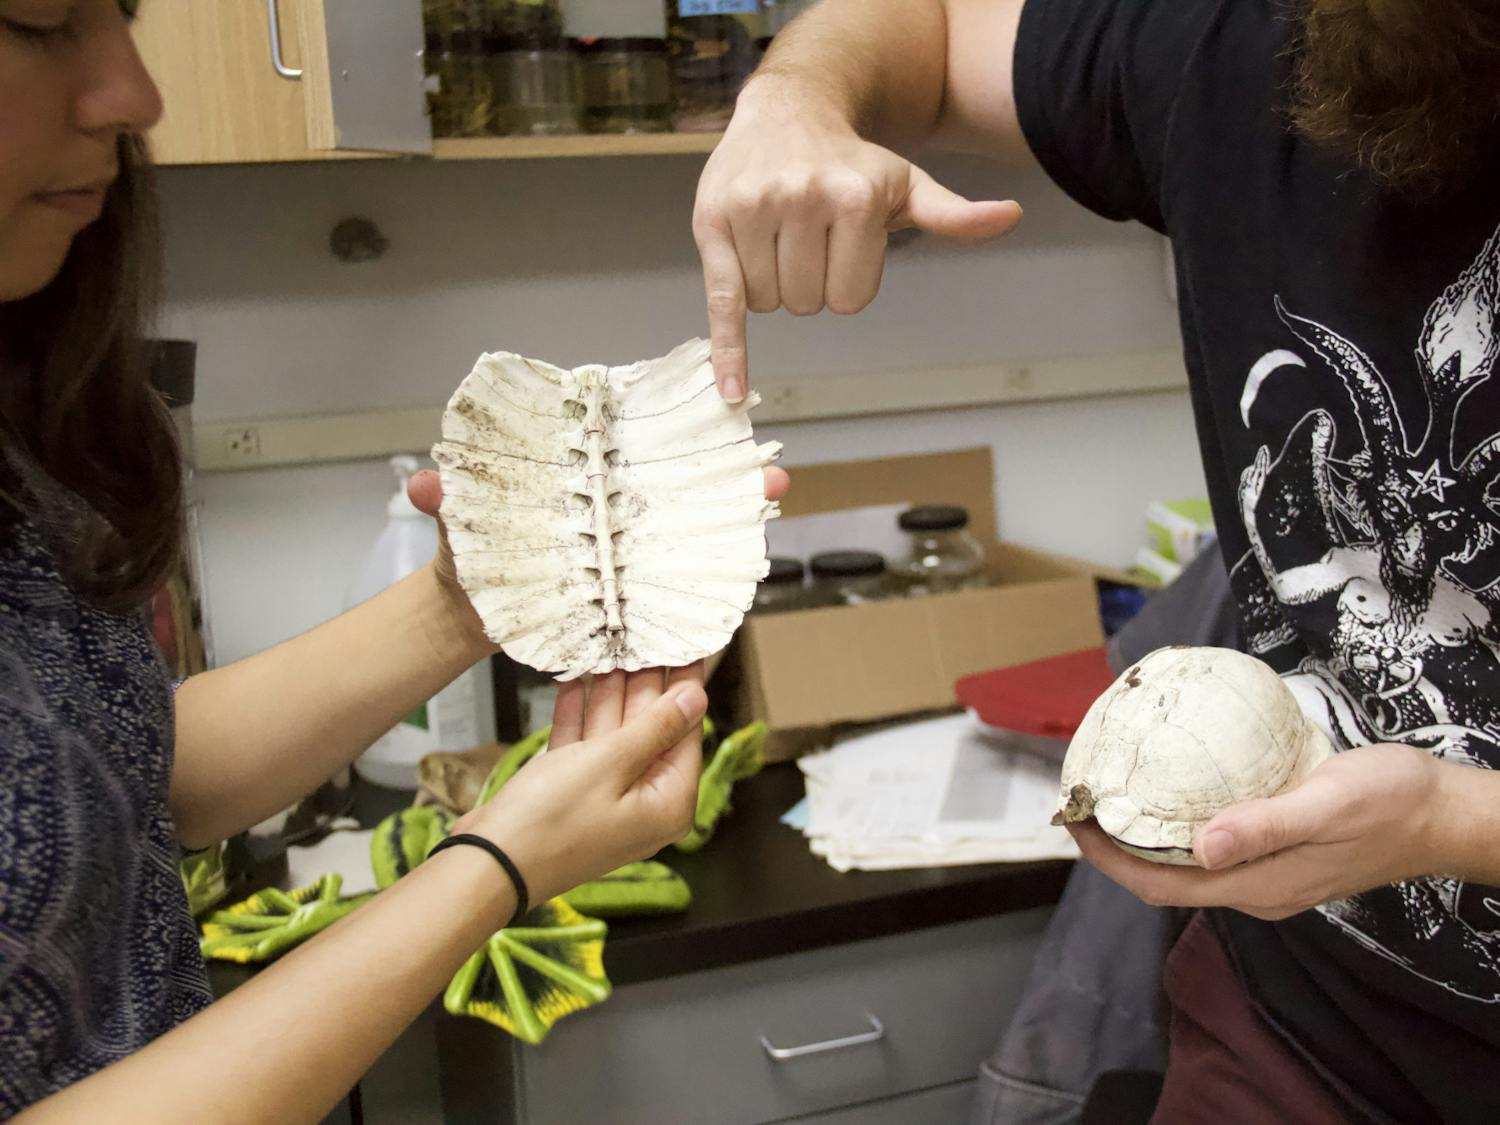 Sarah McGrath-Blaser (left) holds a Florida softshell turtle shell while Arik Hartmann (right) points to it, showing how the vertebrae is fused with the shell, at UF's Longo Lab on Wednesday, Oct. 27, 2021. "Turtles can't leave their shells because they are part of the skeleton," Hartmann said.